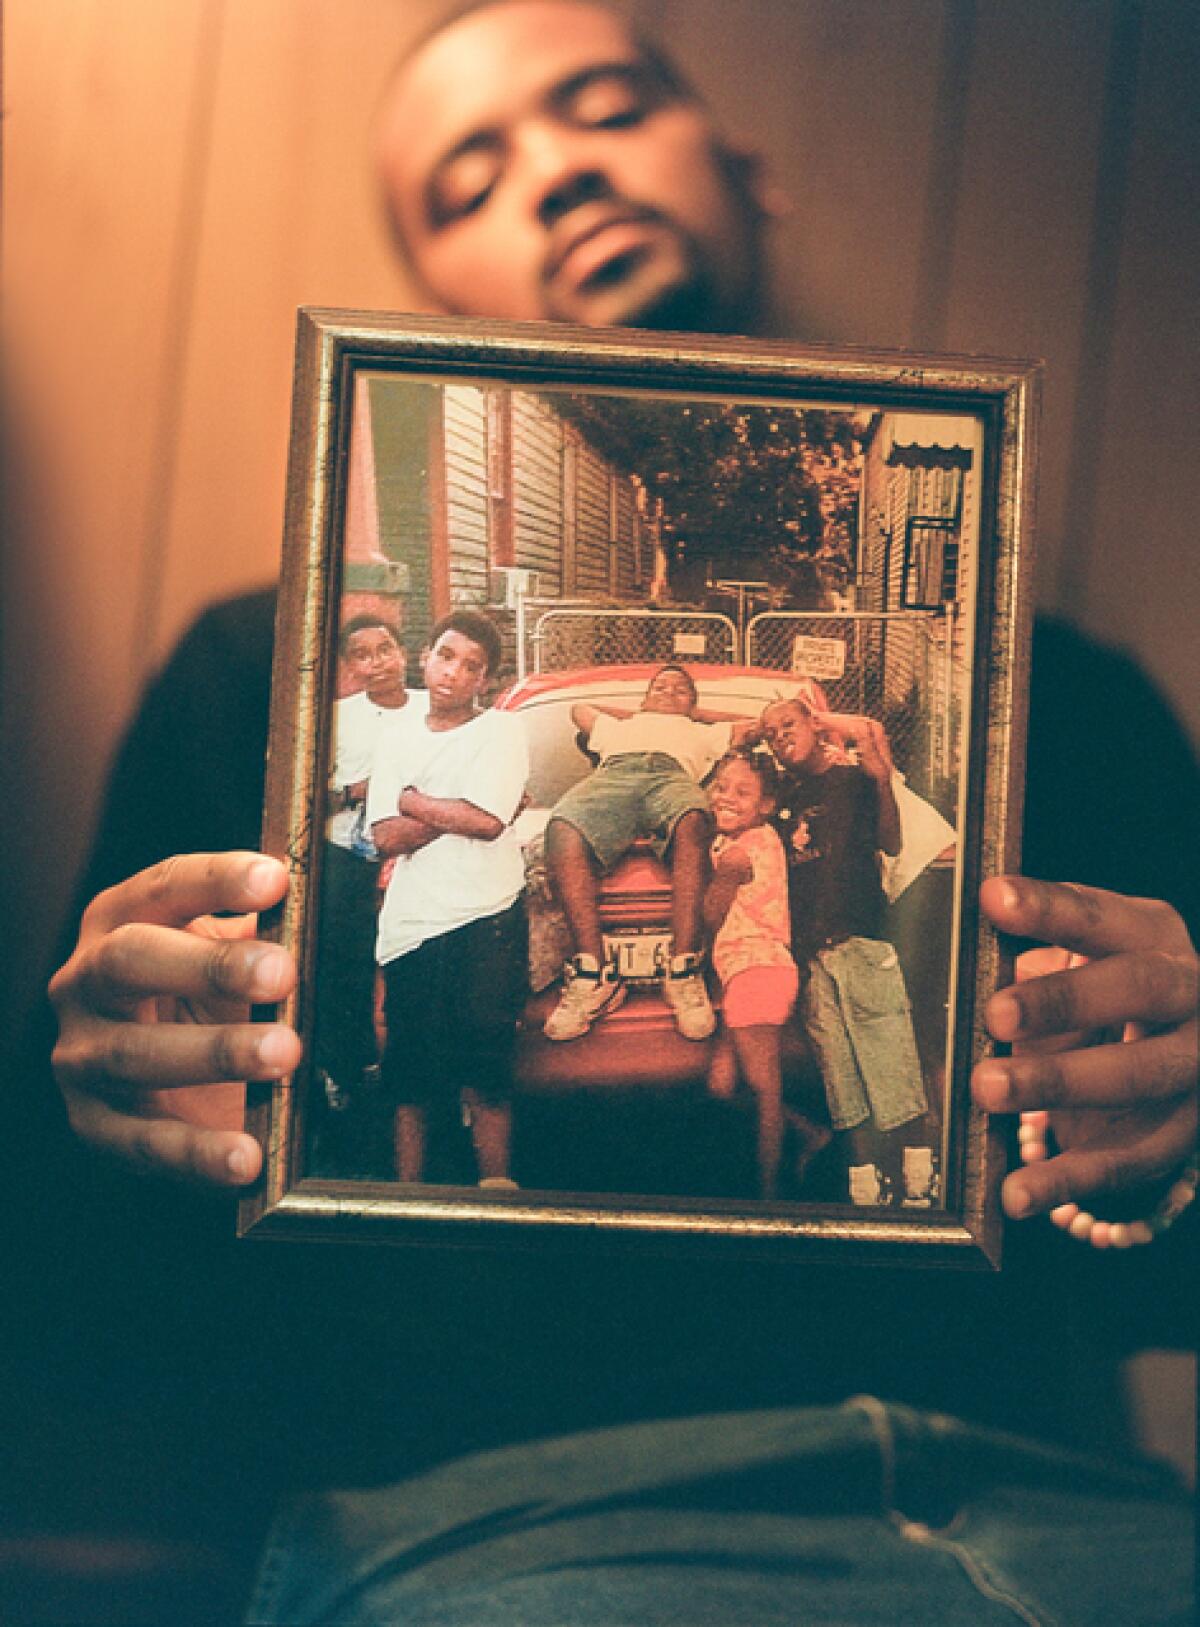 A man holds a framed photo of his family leaning on the back of a parked car